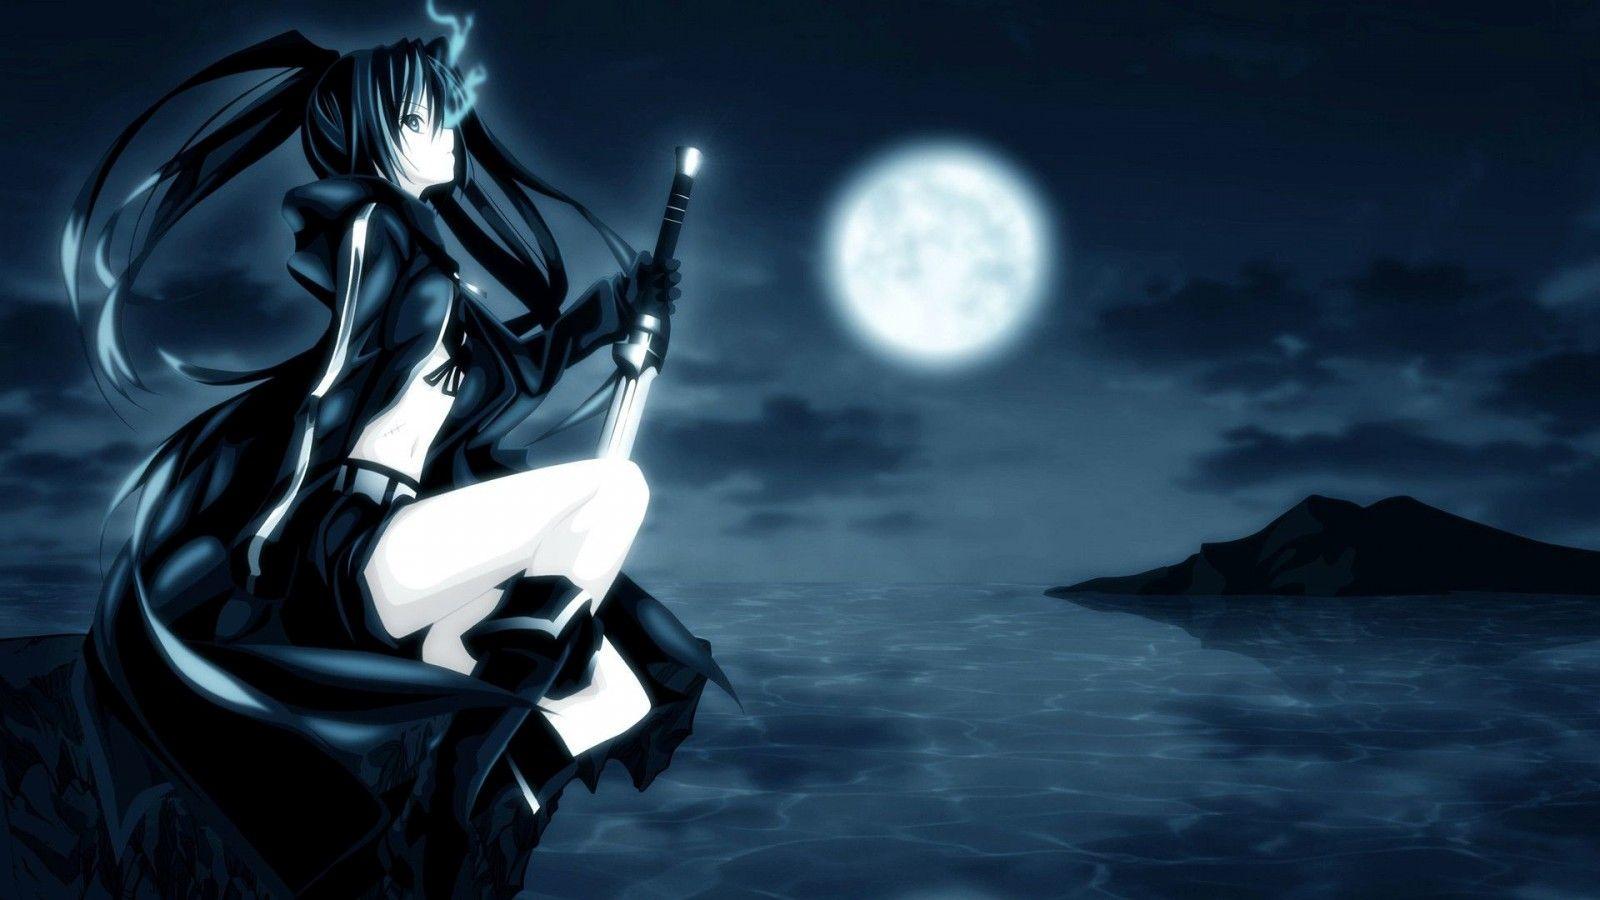 Anime Wallpaper HD Free Download for Windows 7 Lovely Cool Anime